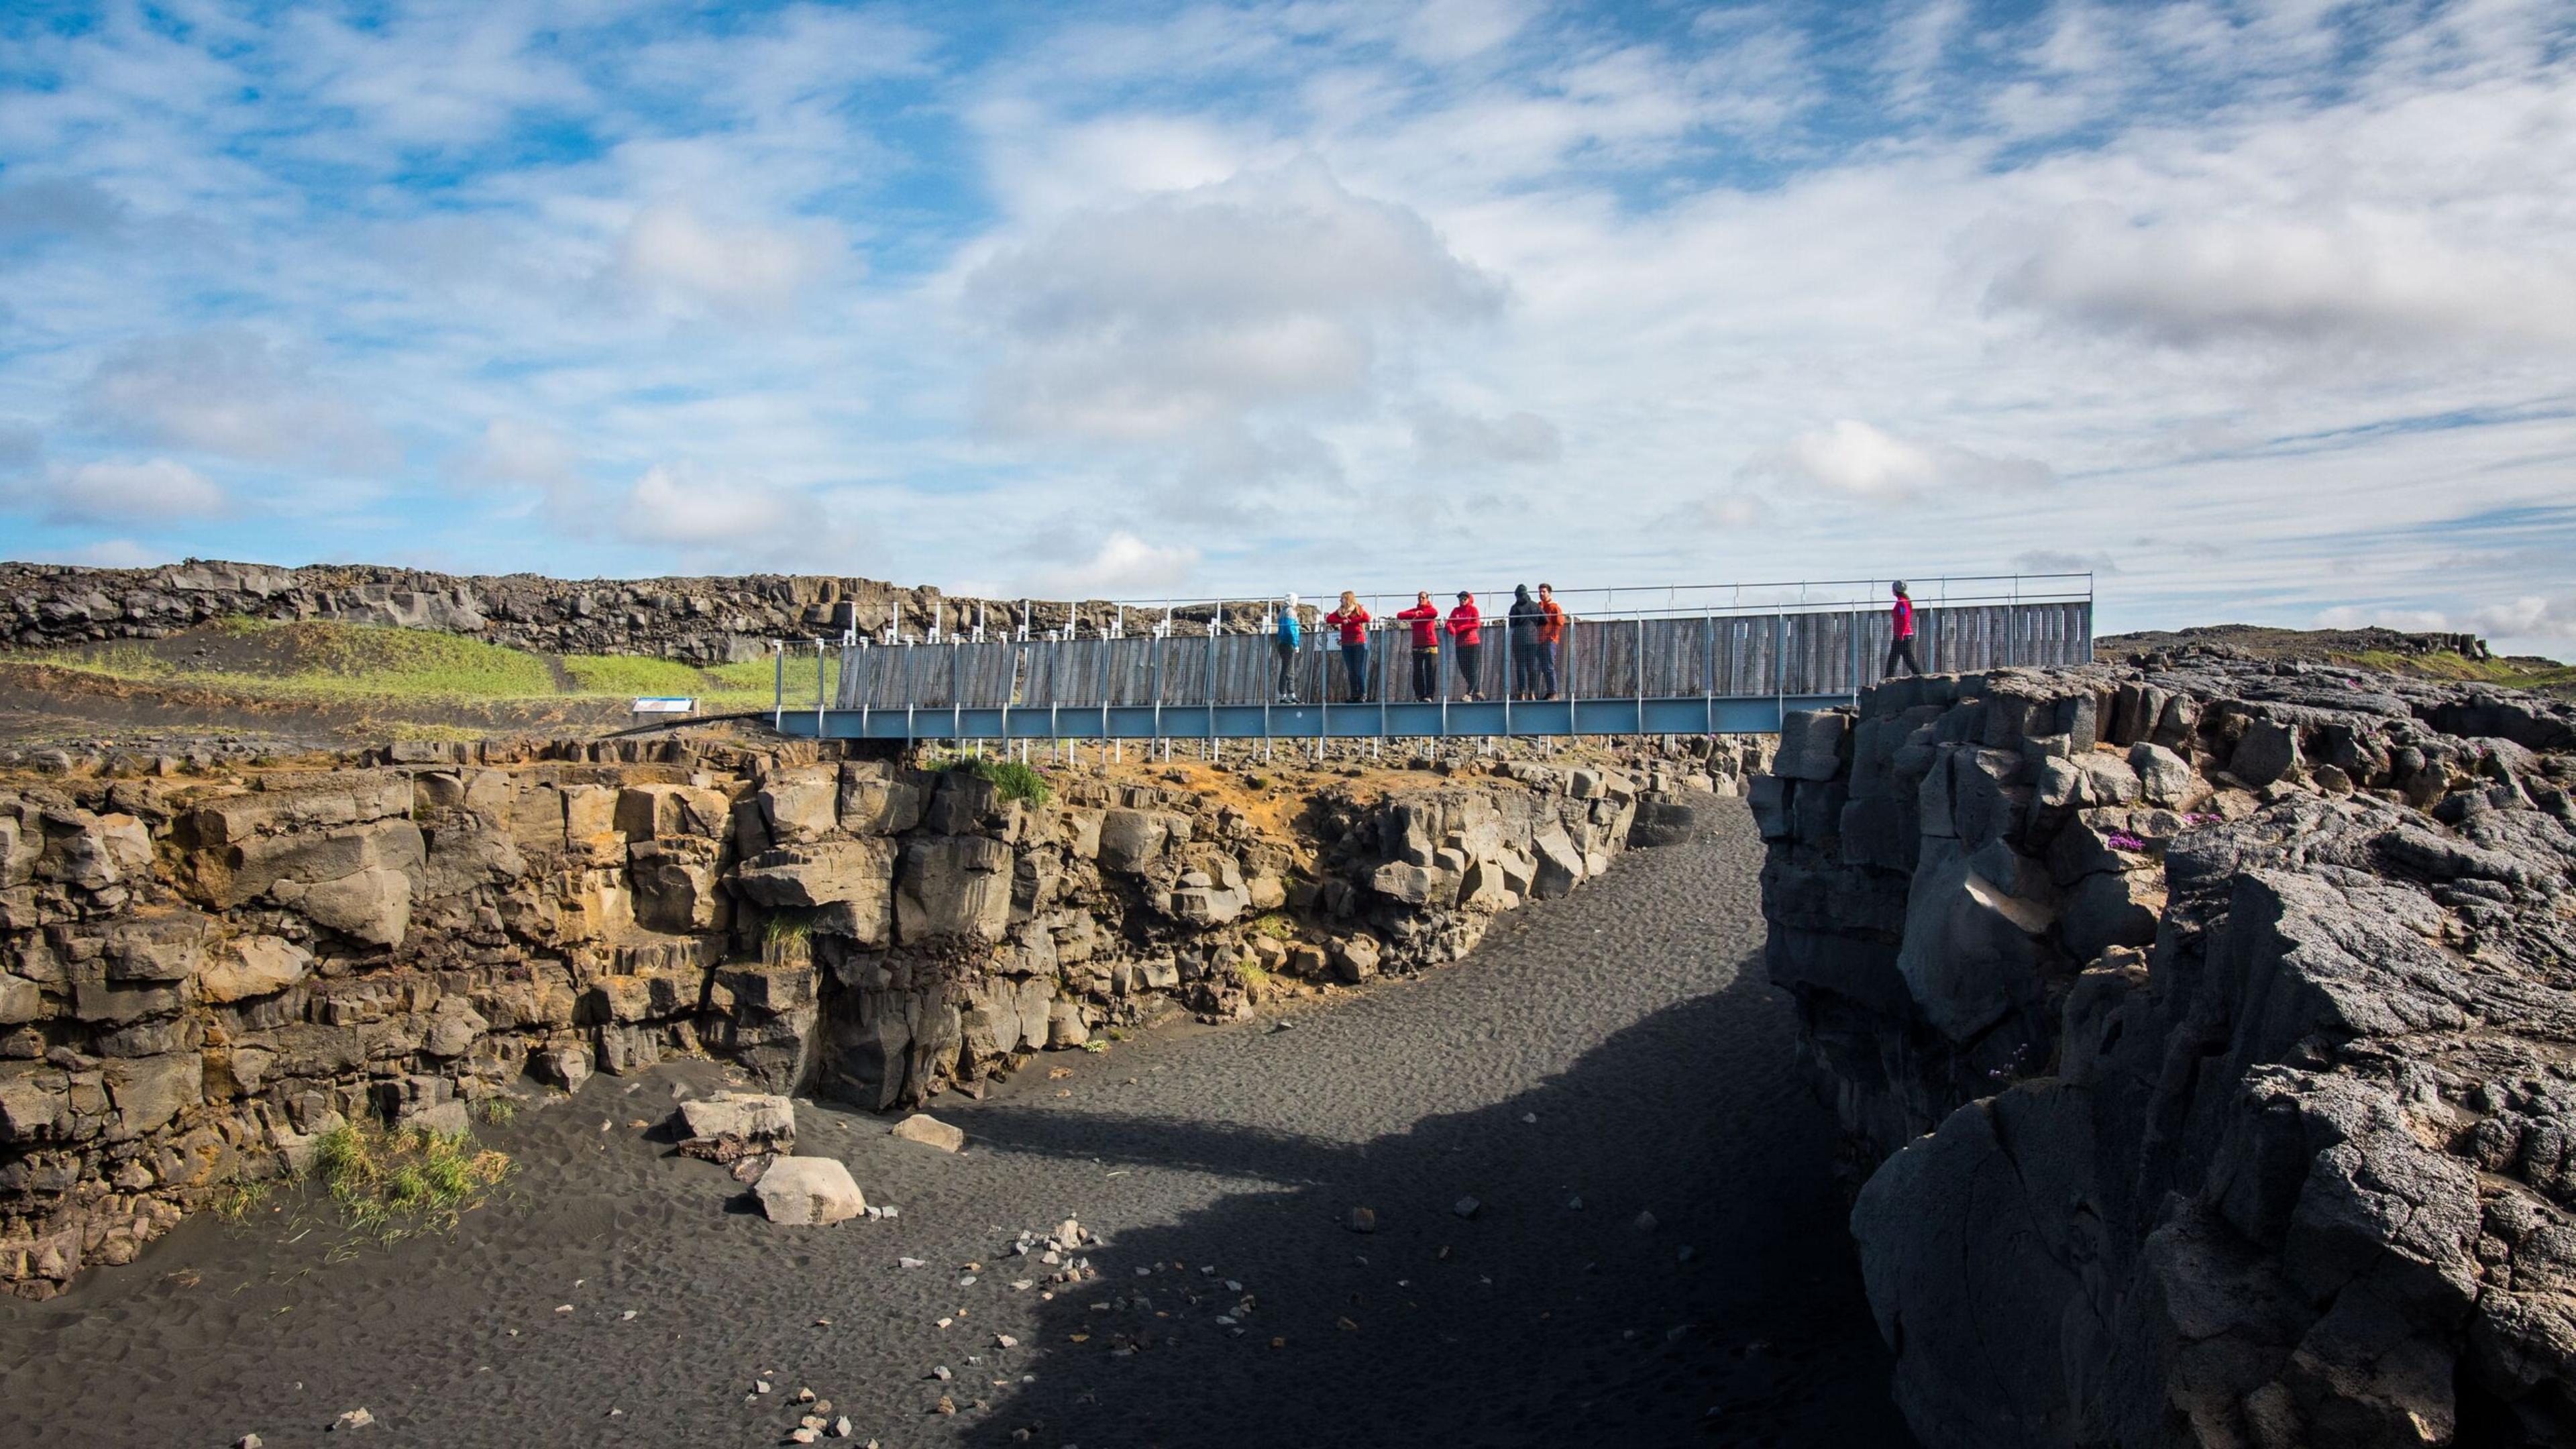 Group of people on the Bridge between continents.